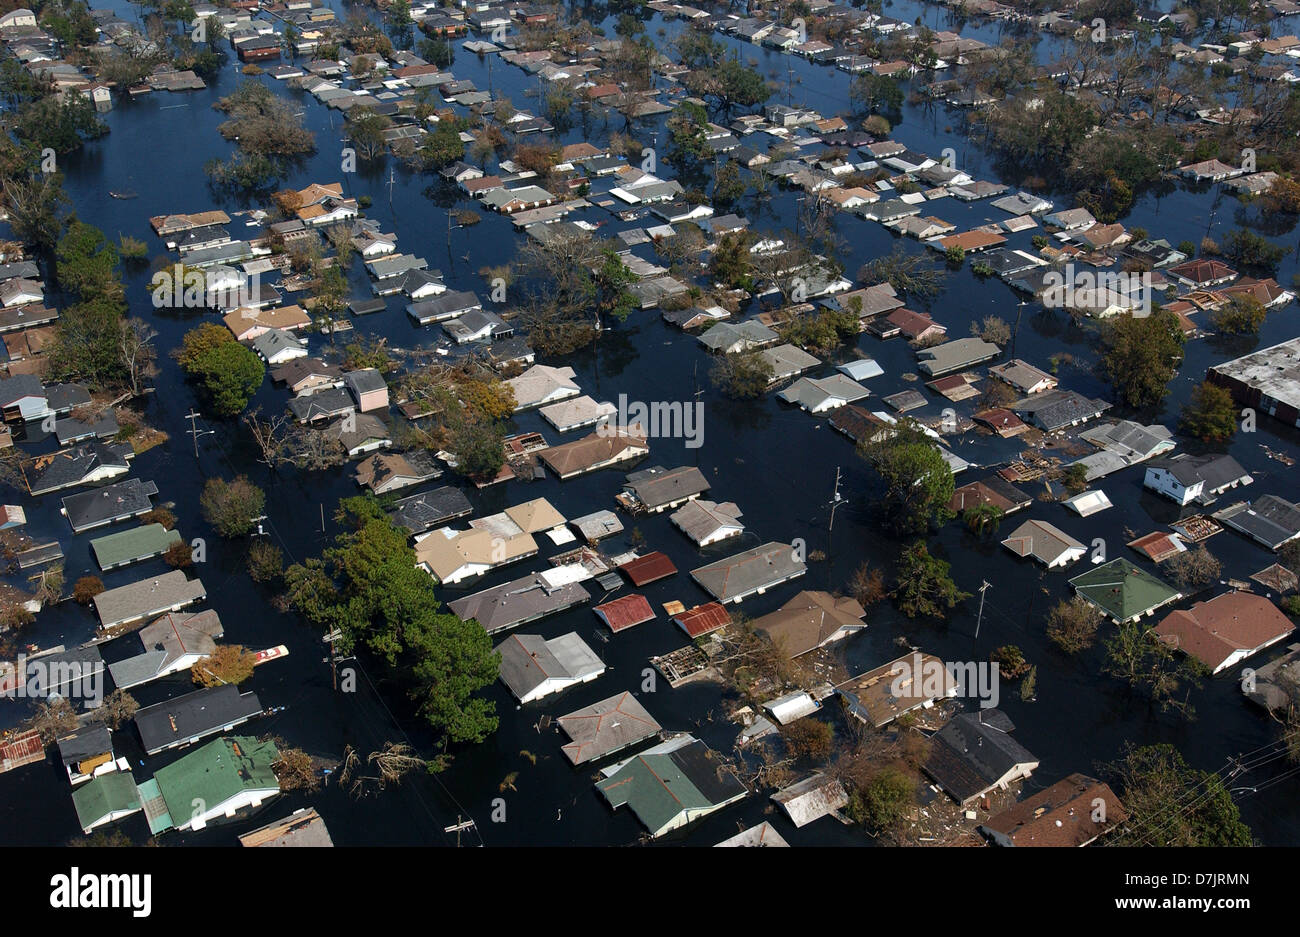 Aerial view of massive flooding and destruction caused by Hurricane Katrina September 7, 2005 in New Orleans, LA. Stock Photo